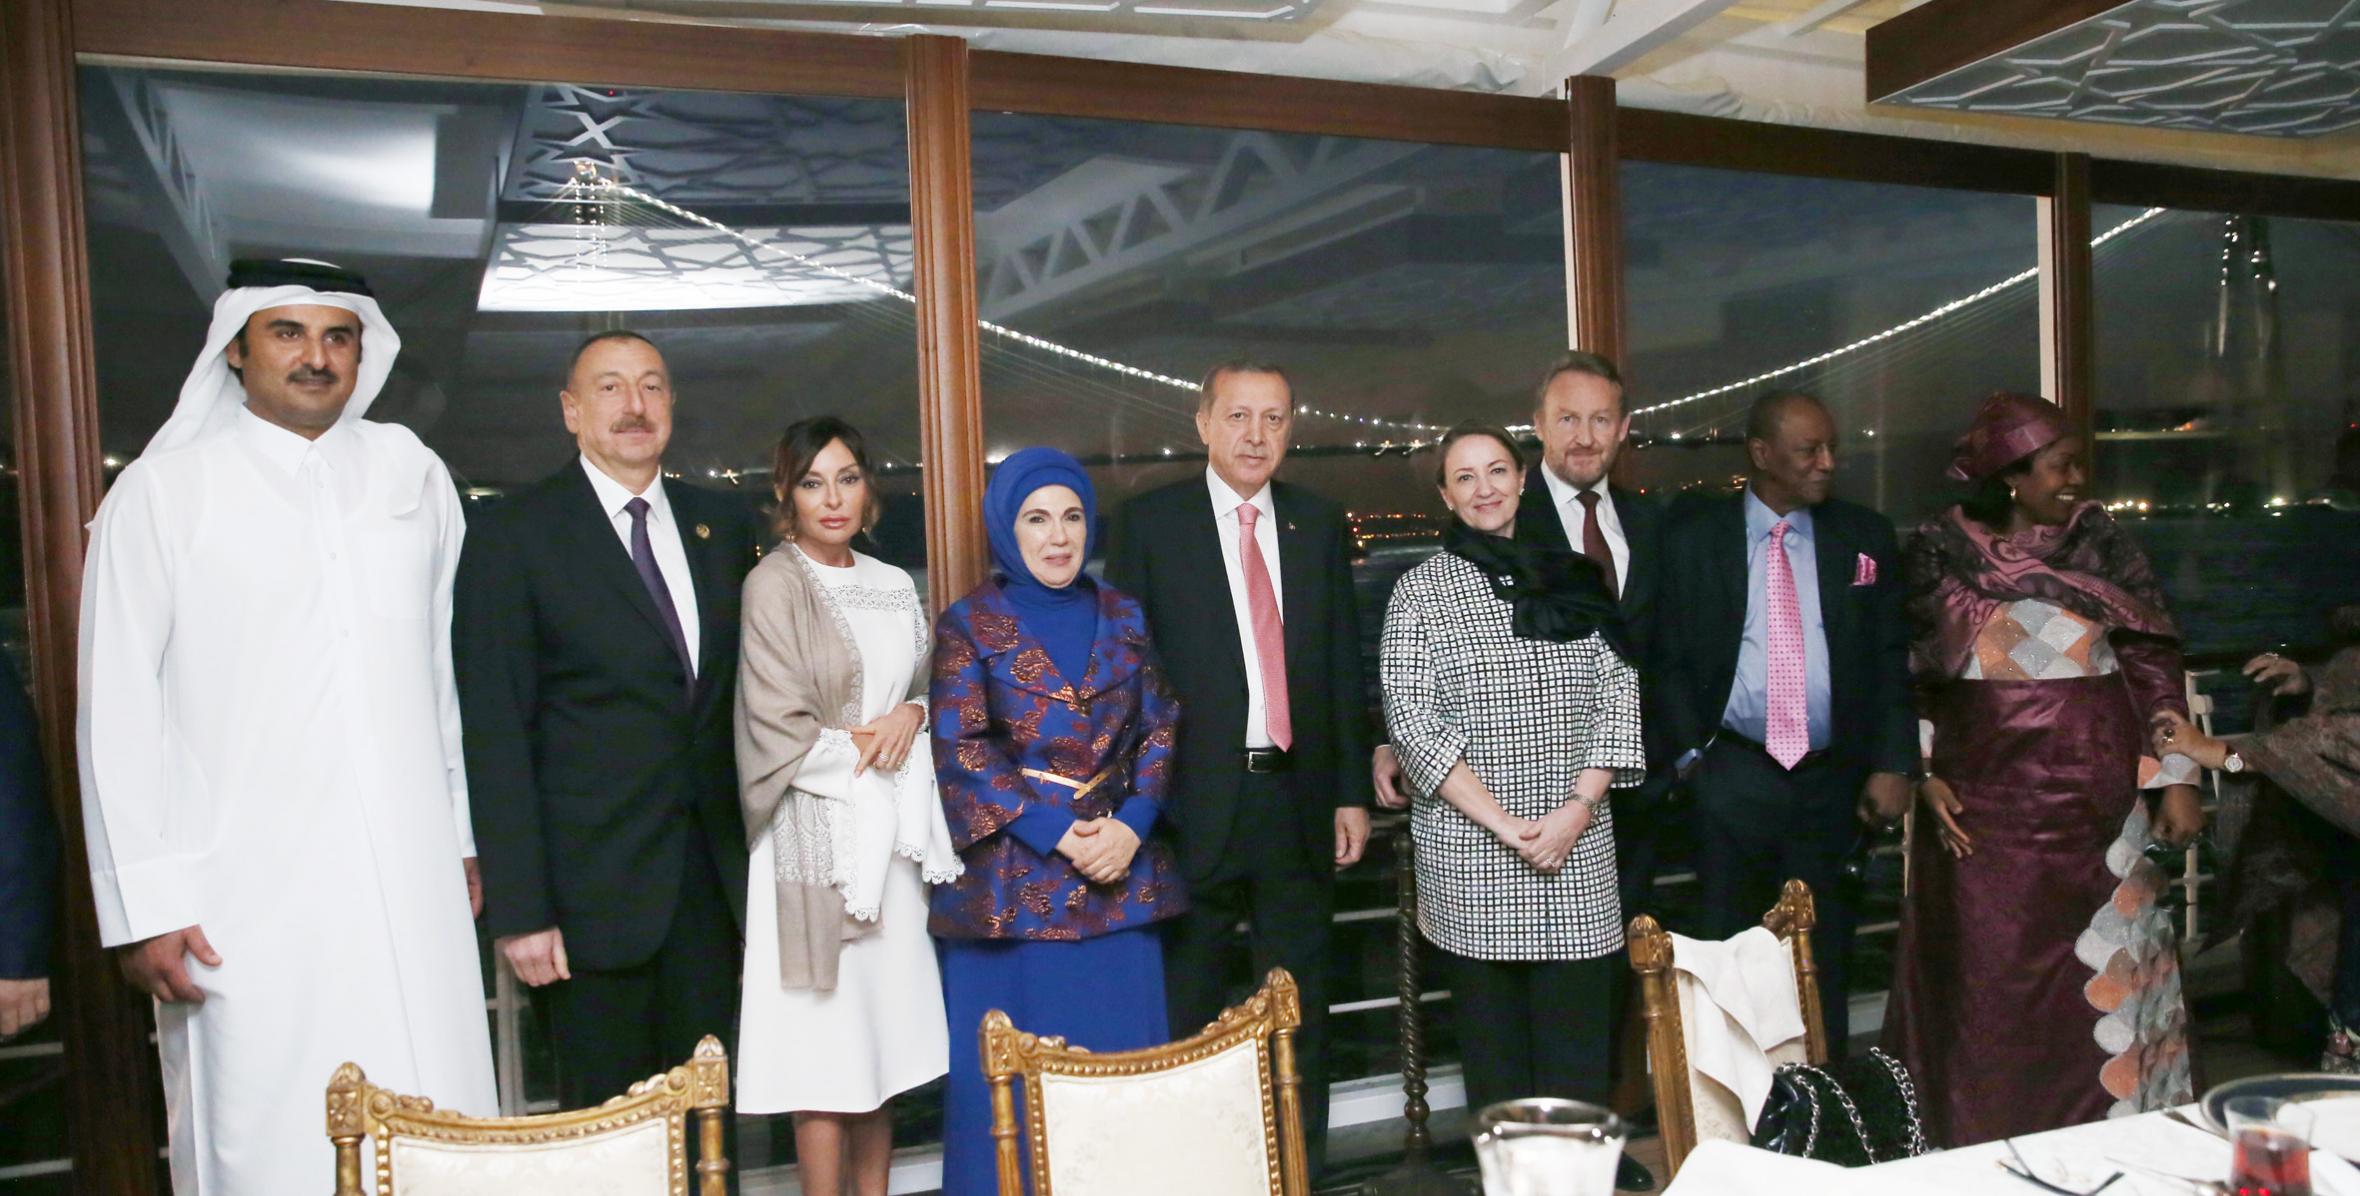 Dinner reception was hosted in honor of heads of state and government